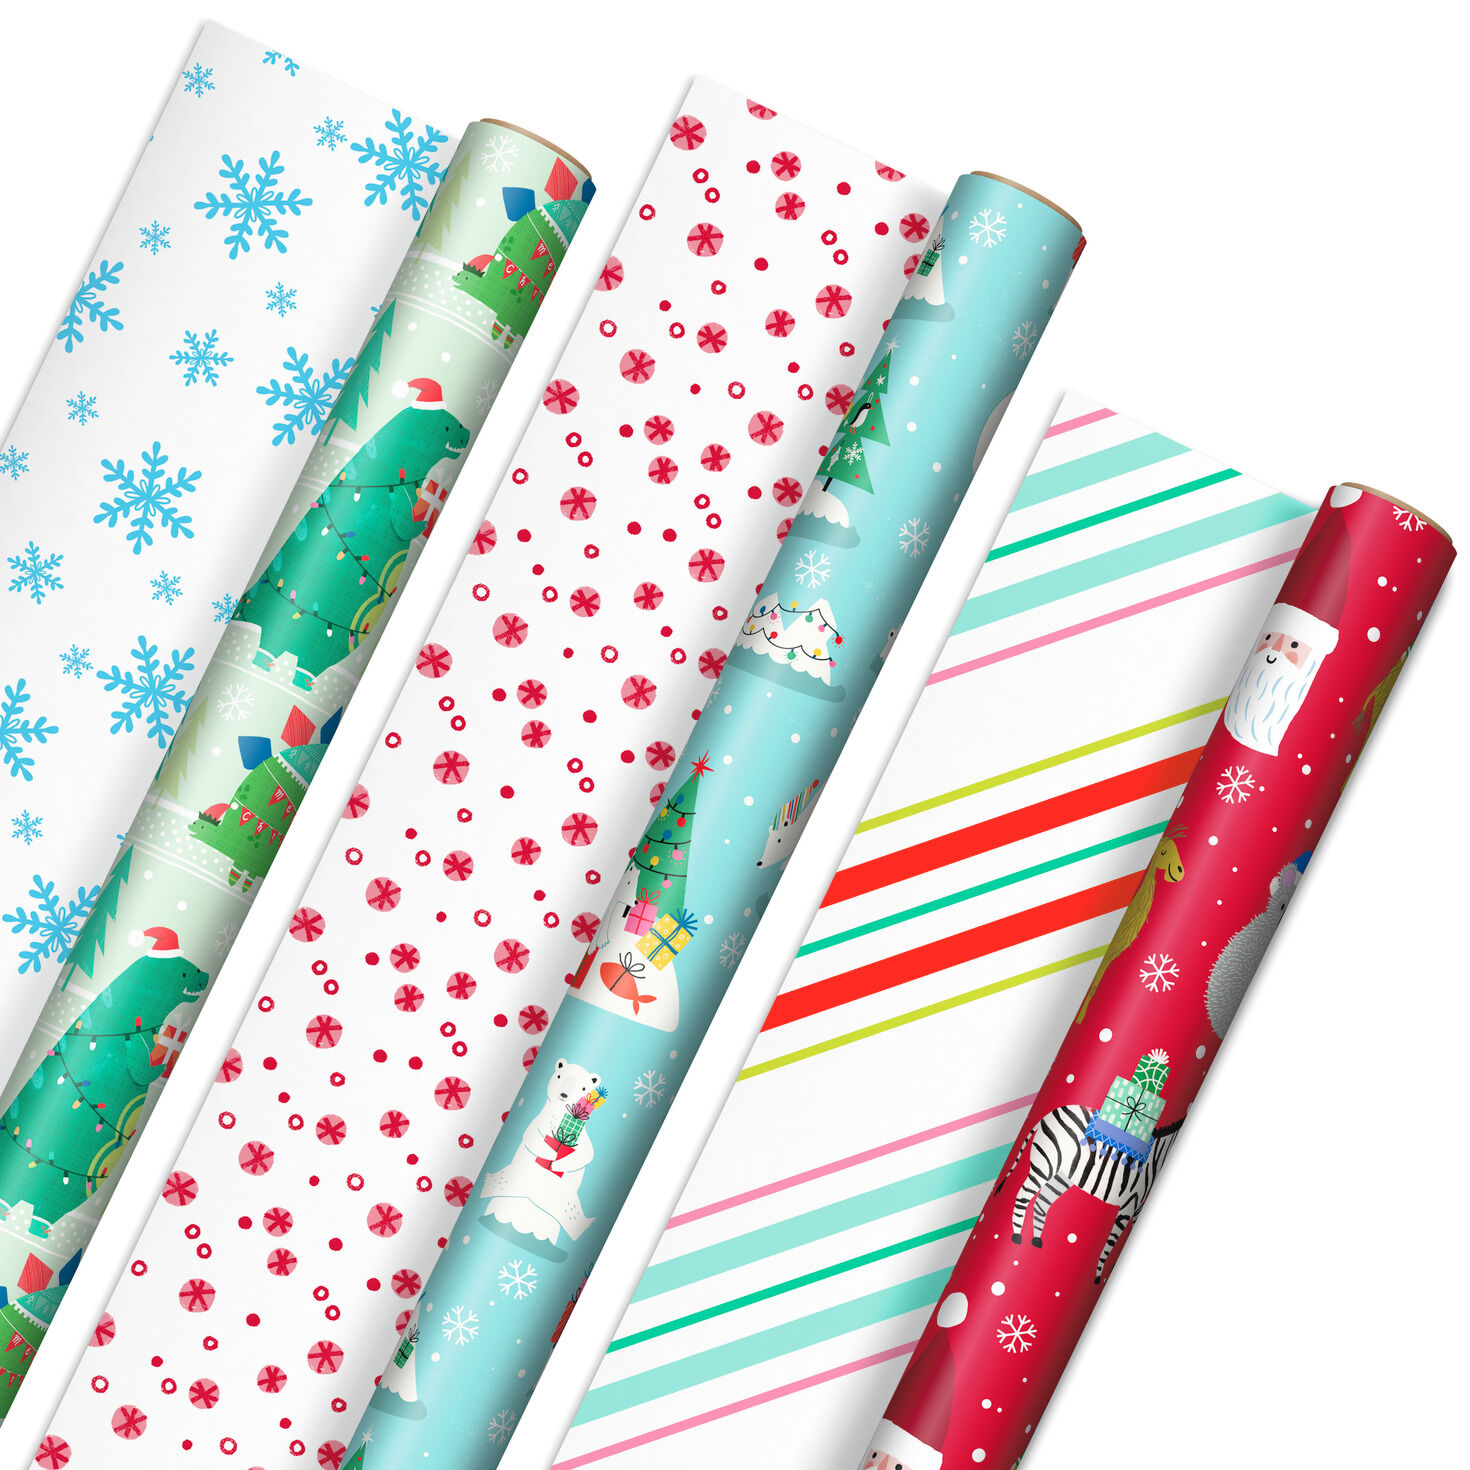 Gift Wrap Company 3-Count Assorted Winter Wrapping Paper w/ Little